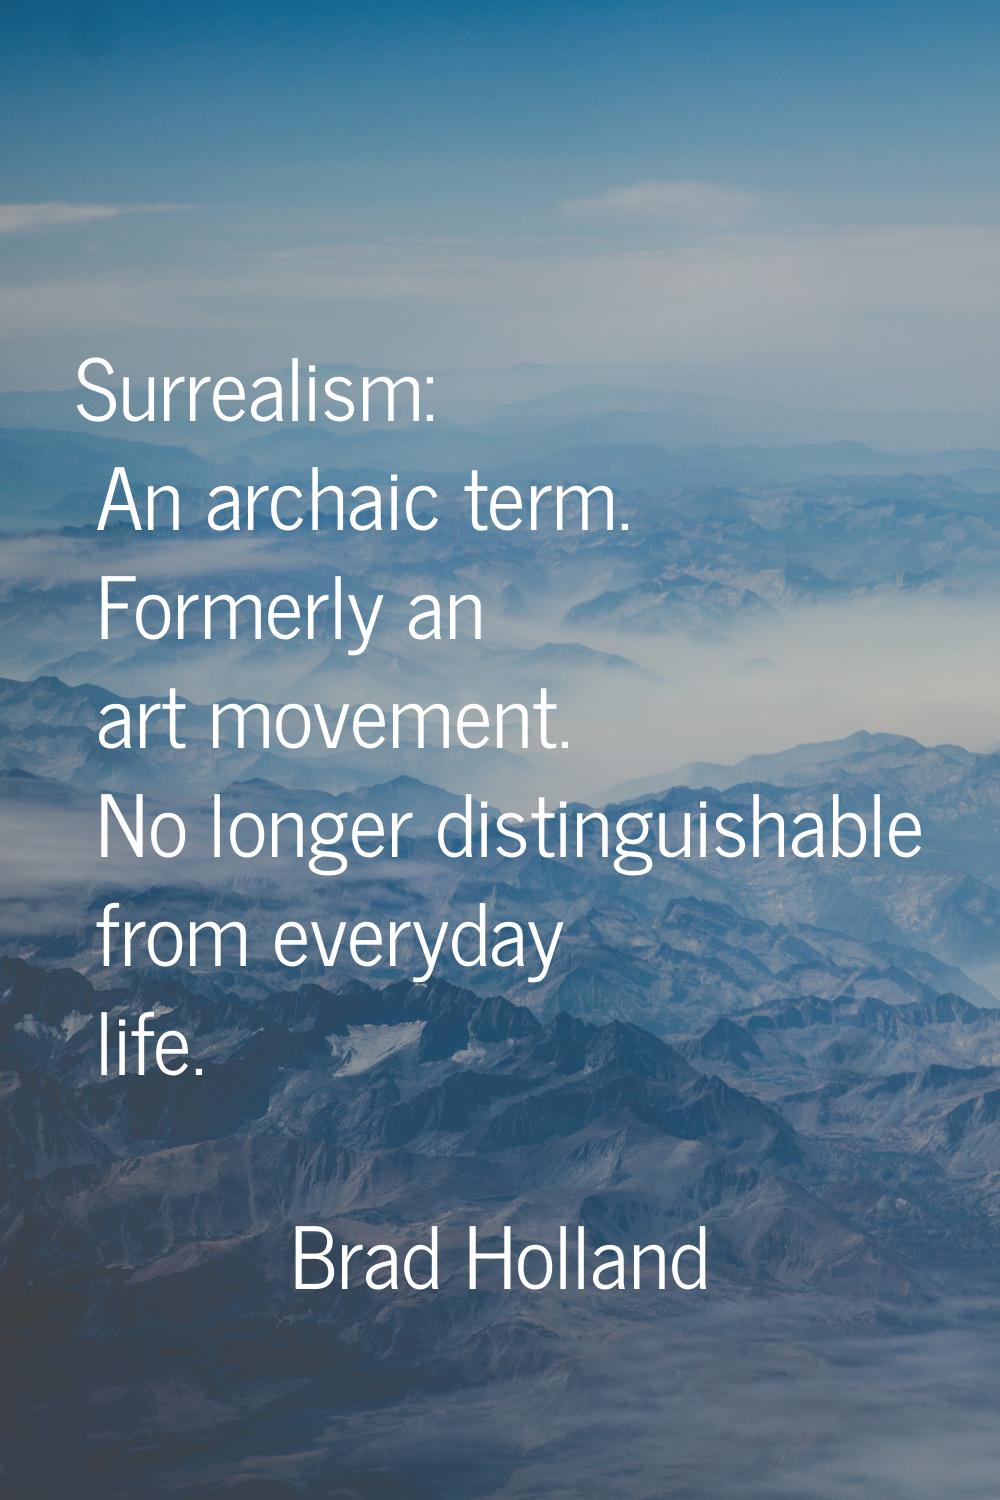 Surrealism: An archaic term. Formerly an art movement. No longer distinguishable from everyday life